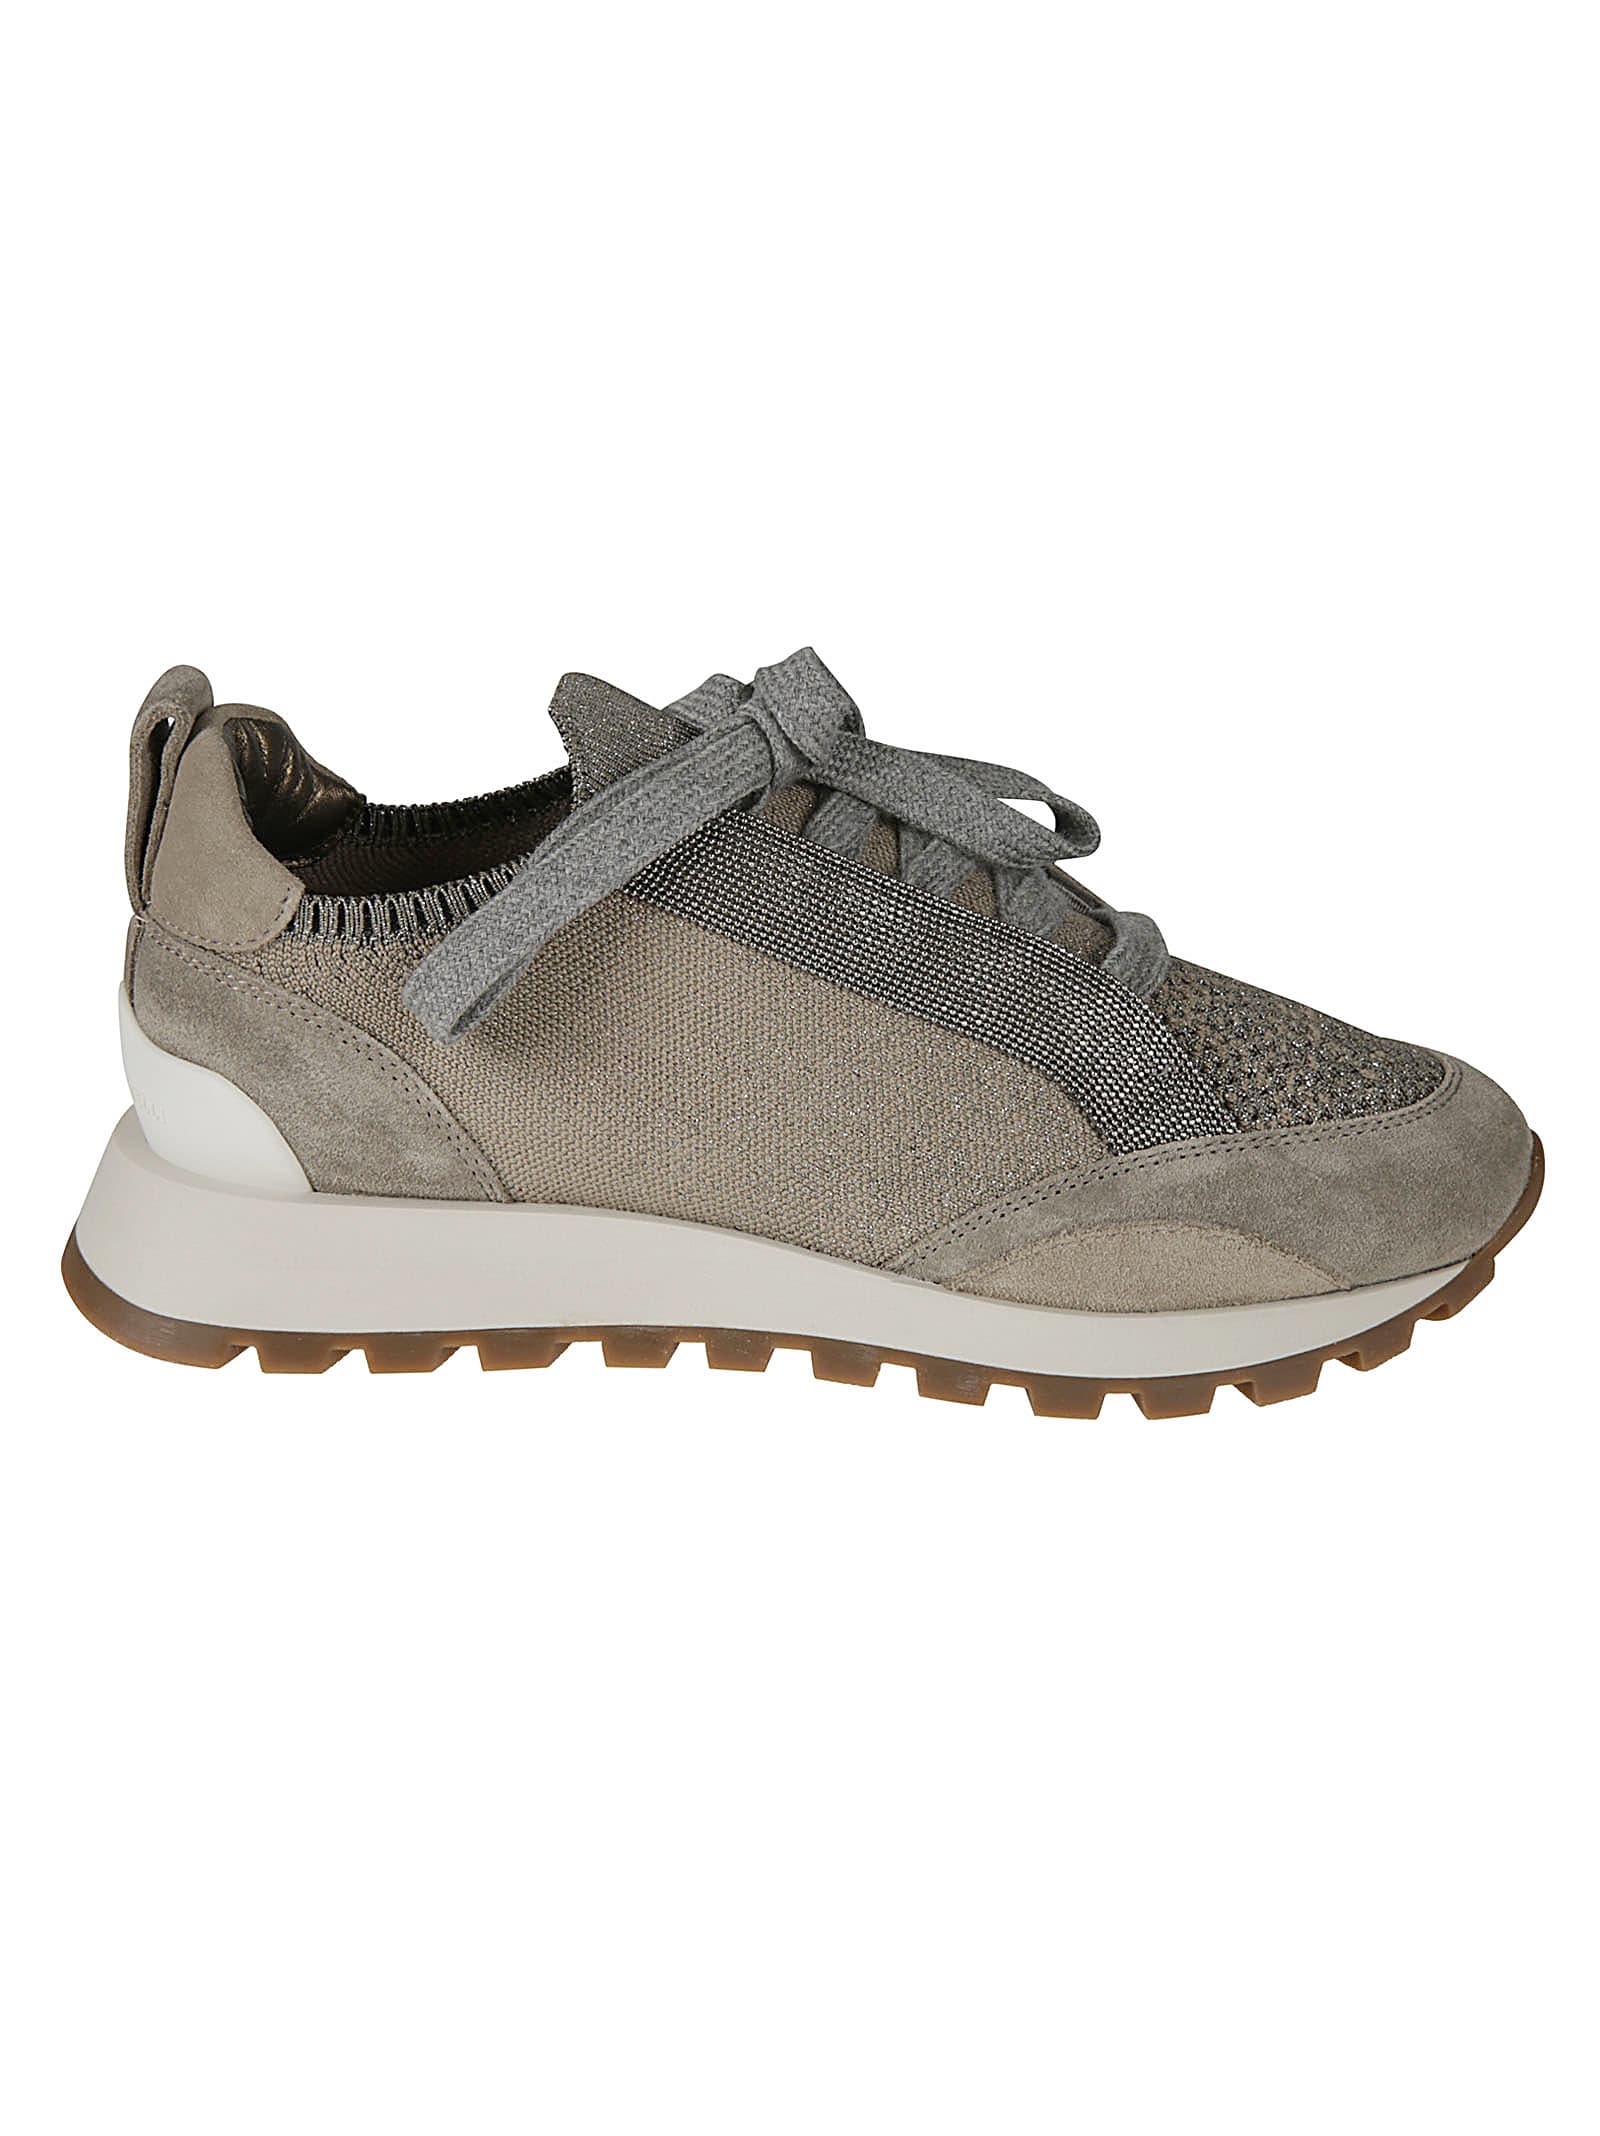 Brunello Cucinelli Bead Embellished Mesh Paneled Sneakers